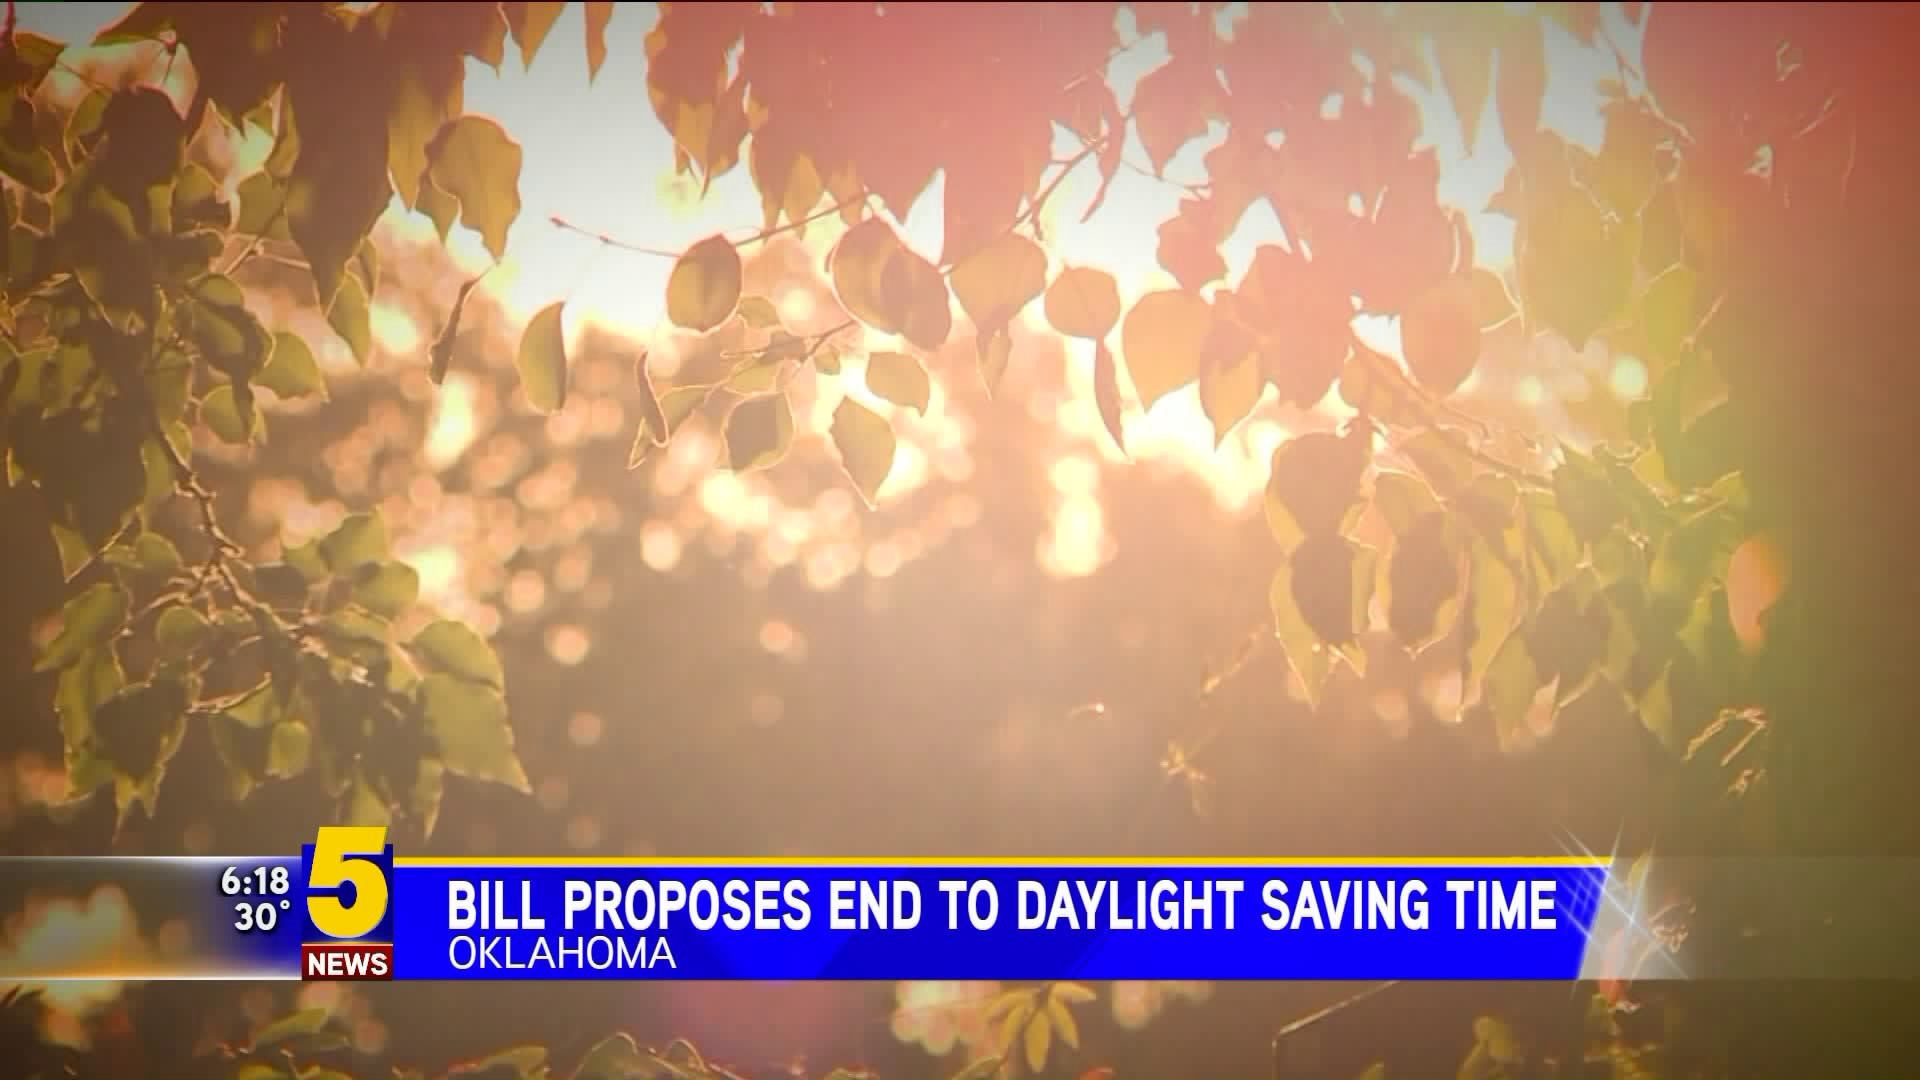 Bill Proposes End To Daylight Saving Time In Oklahoma